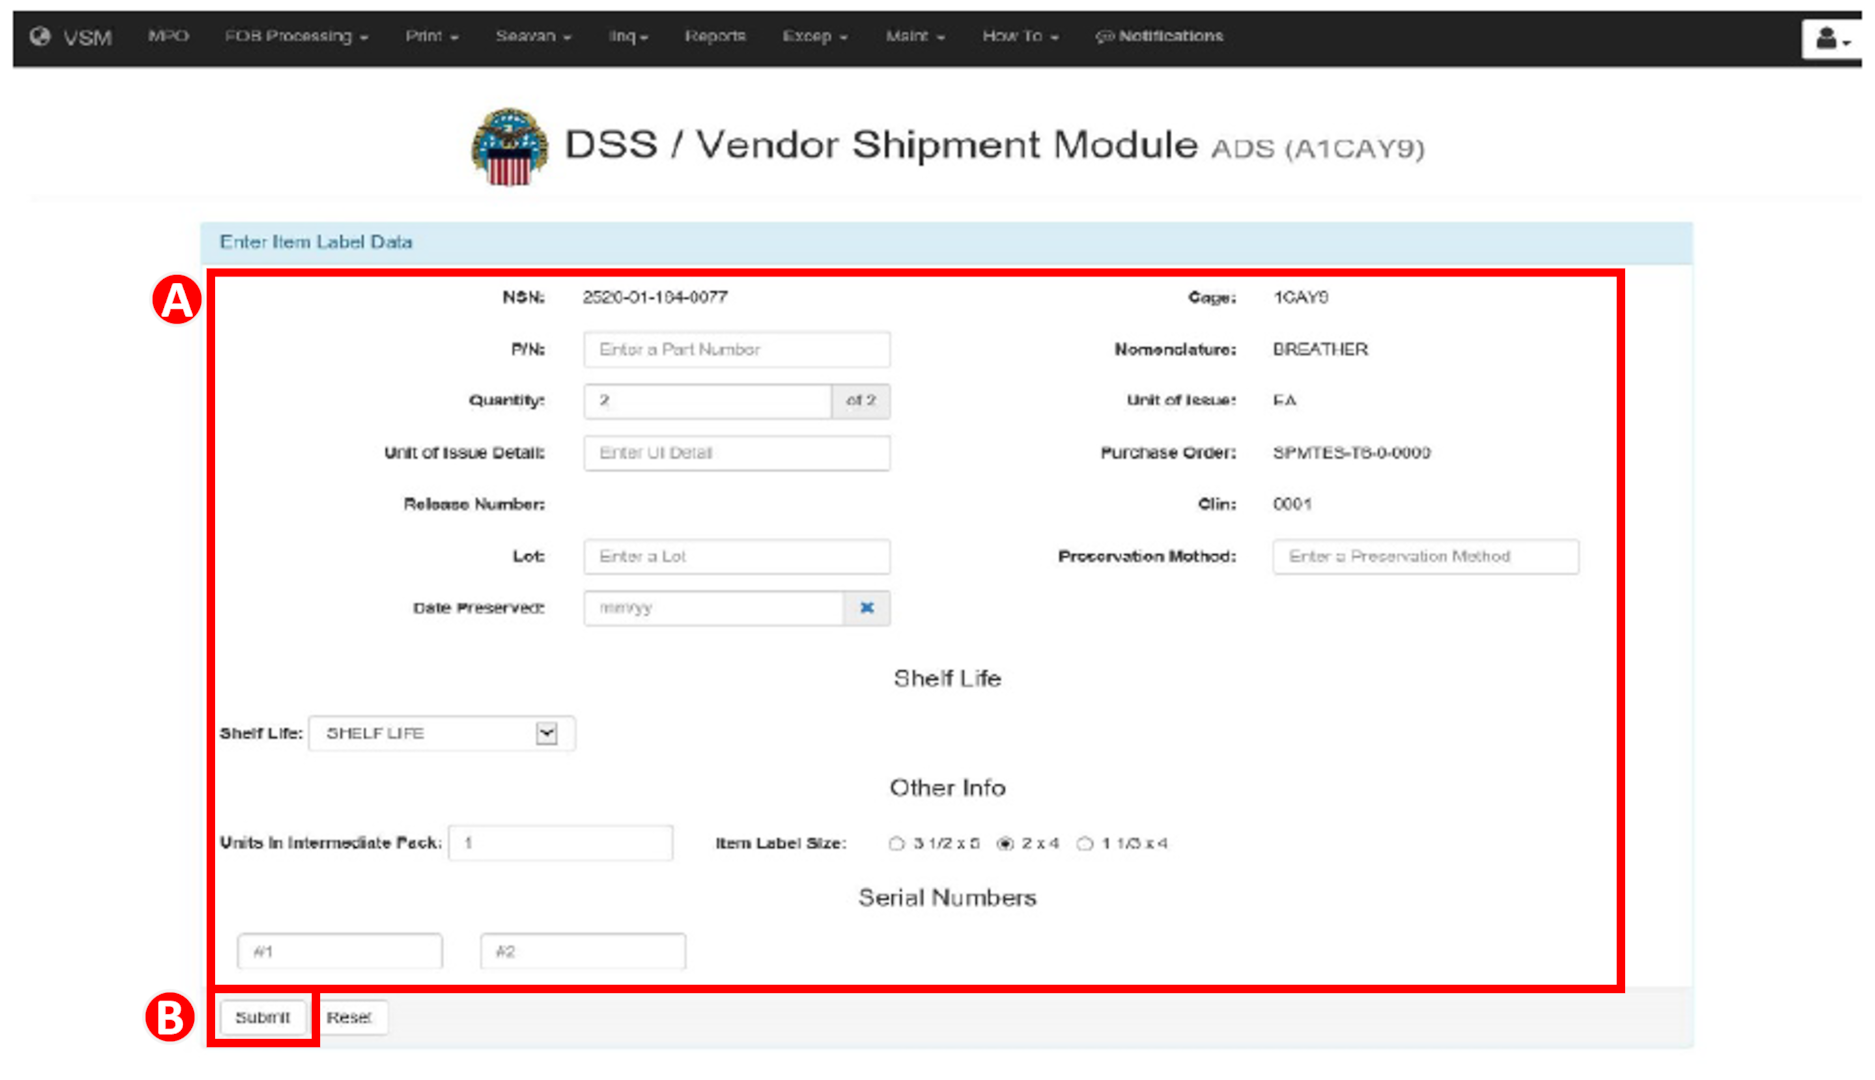 Entering Item Label data into Vendor Shipment Module to populate on Military Shipment Label. Please see adjacent text or context for equivalent information of image.